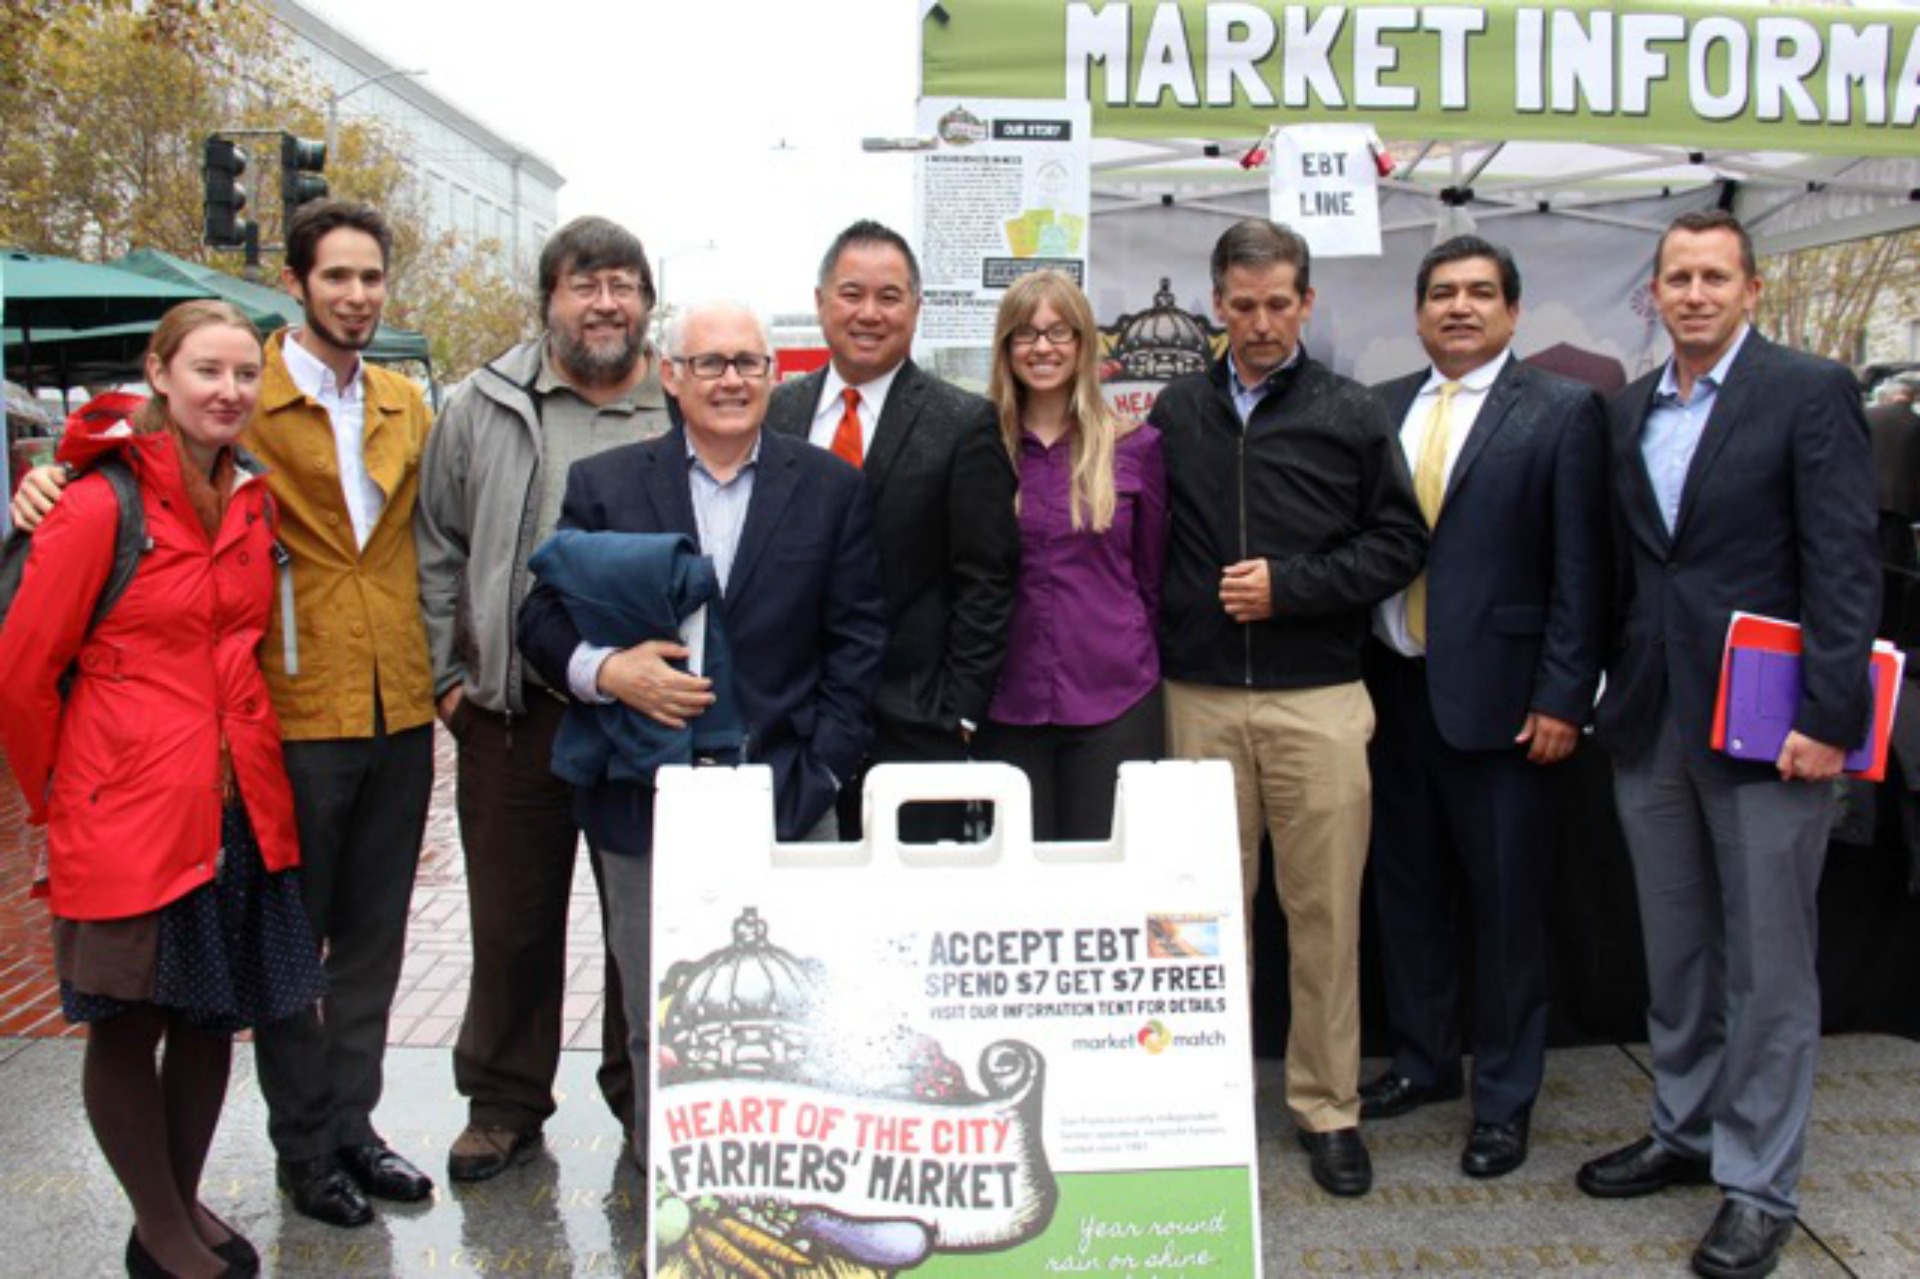 Celebrating the passage of nutrition incentive matching legislation AB 1321 at Heart of the City Farmers Market in September. From left: Christina Oatfield, Eli Zigas, Peter Ruddock, Michael Dimock, Assemblymember Phil Ting, Kate Creps, Martin Bourque, Xavier Morales, Allen Moy.